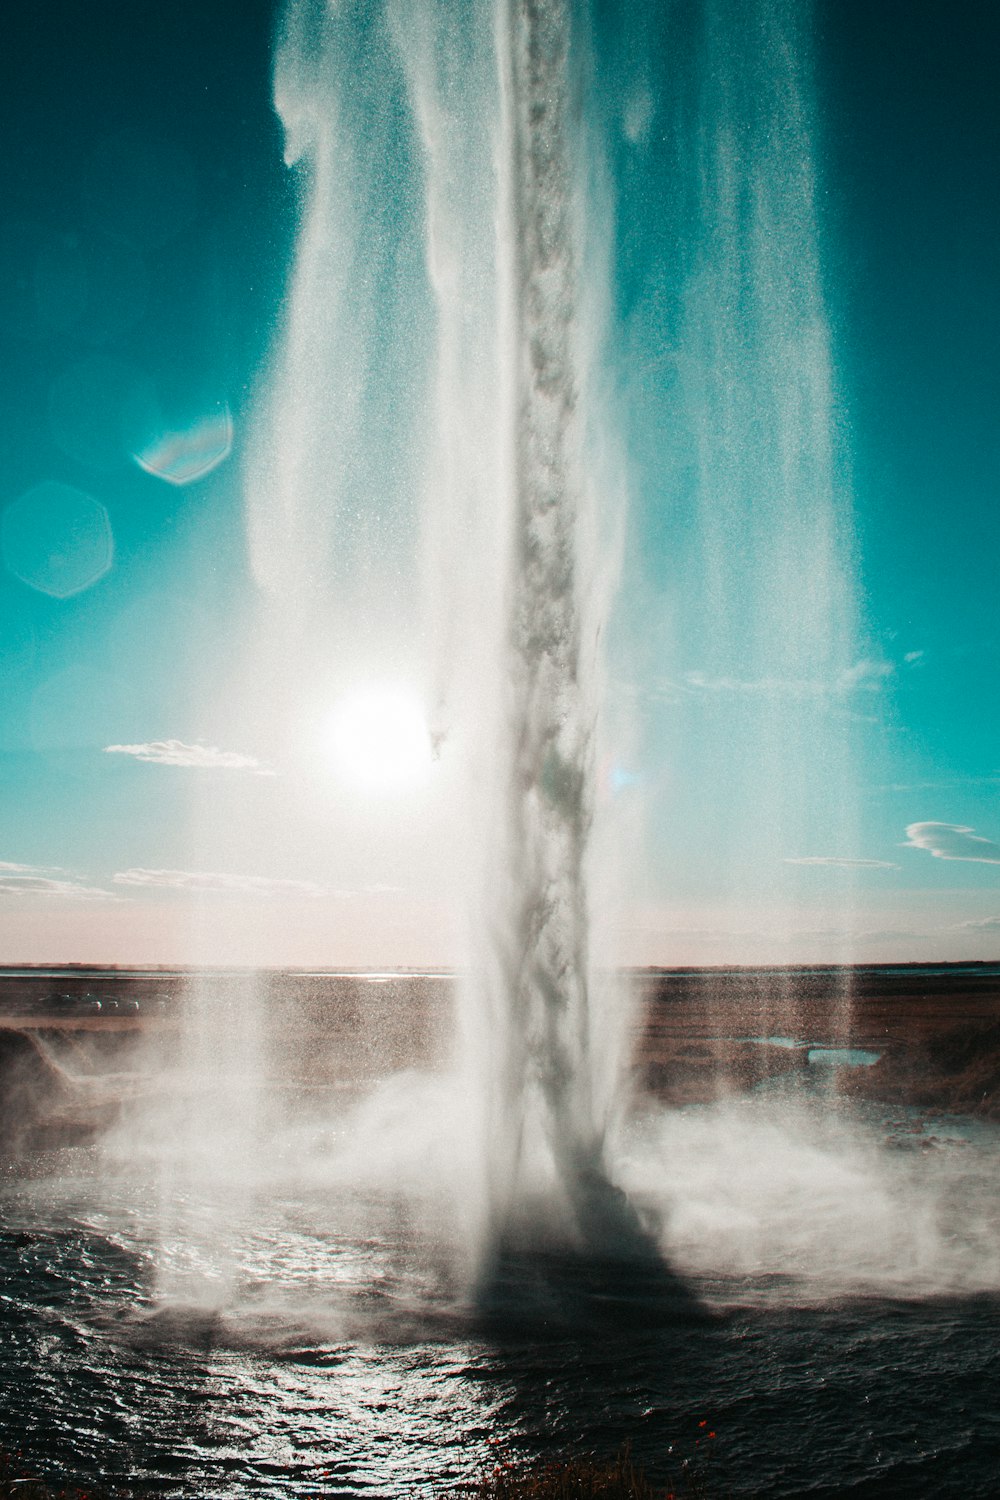 water fountain under blue sky during daytime